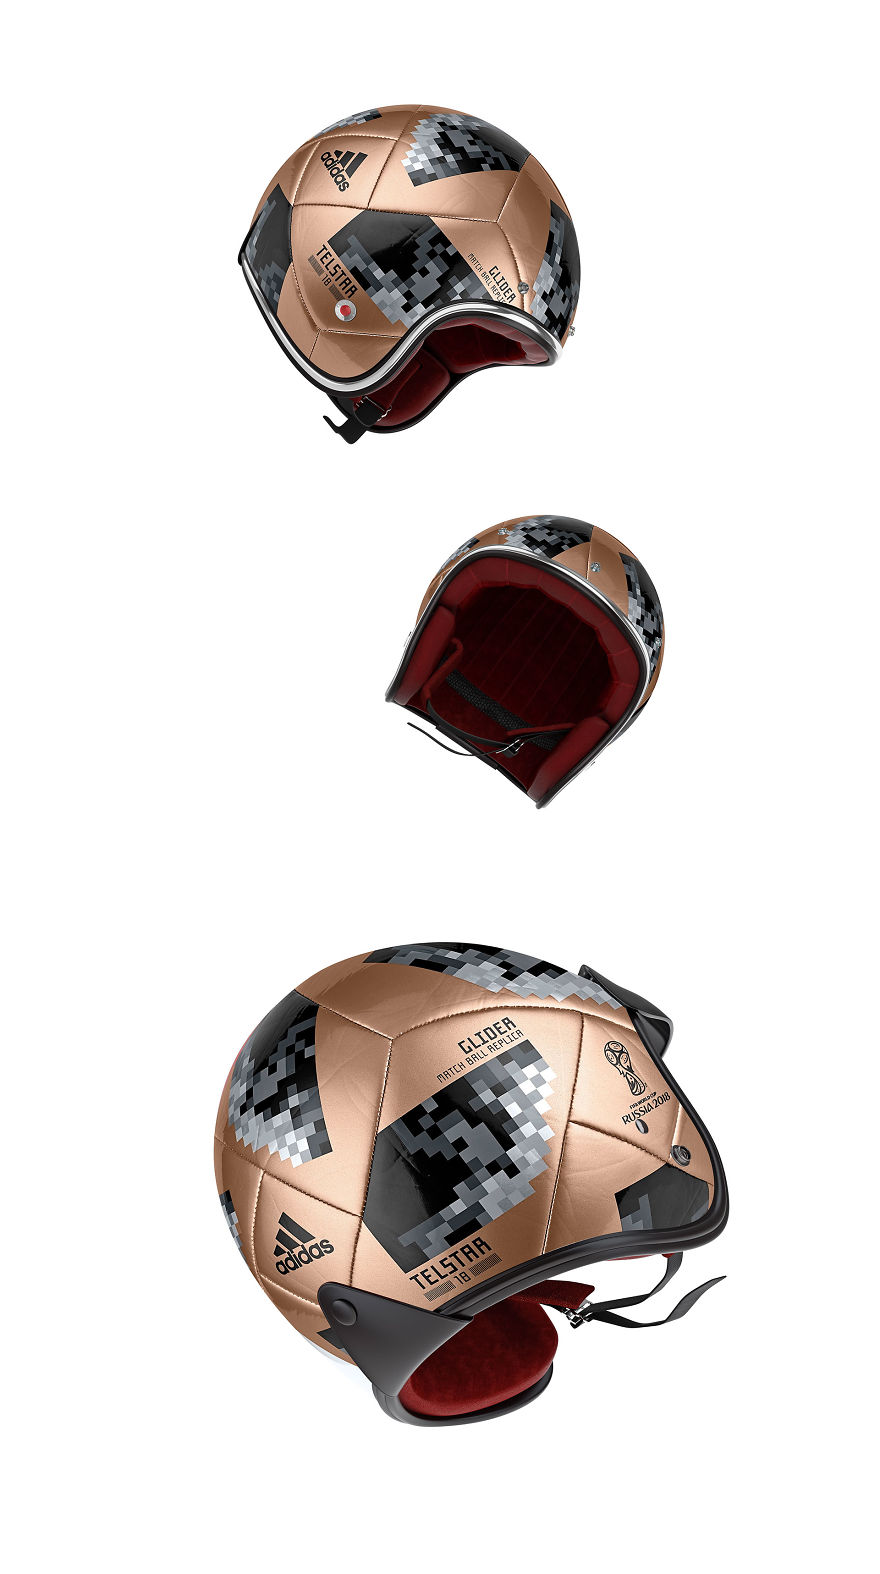 I Made Helmet Design Inspired By Fifa Russia 2018 Official Soccer Ball.